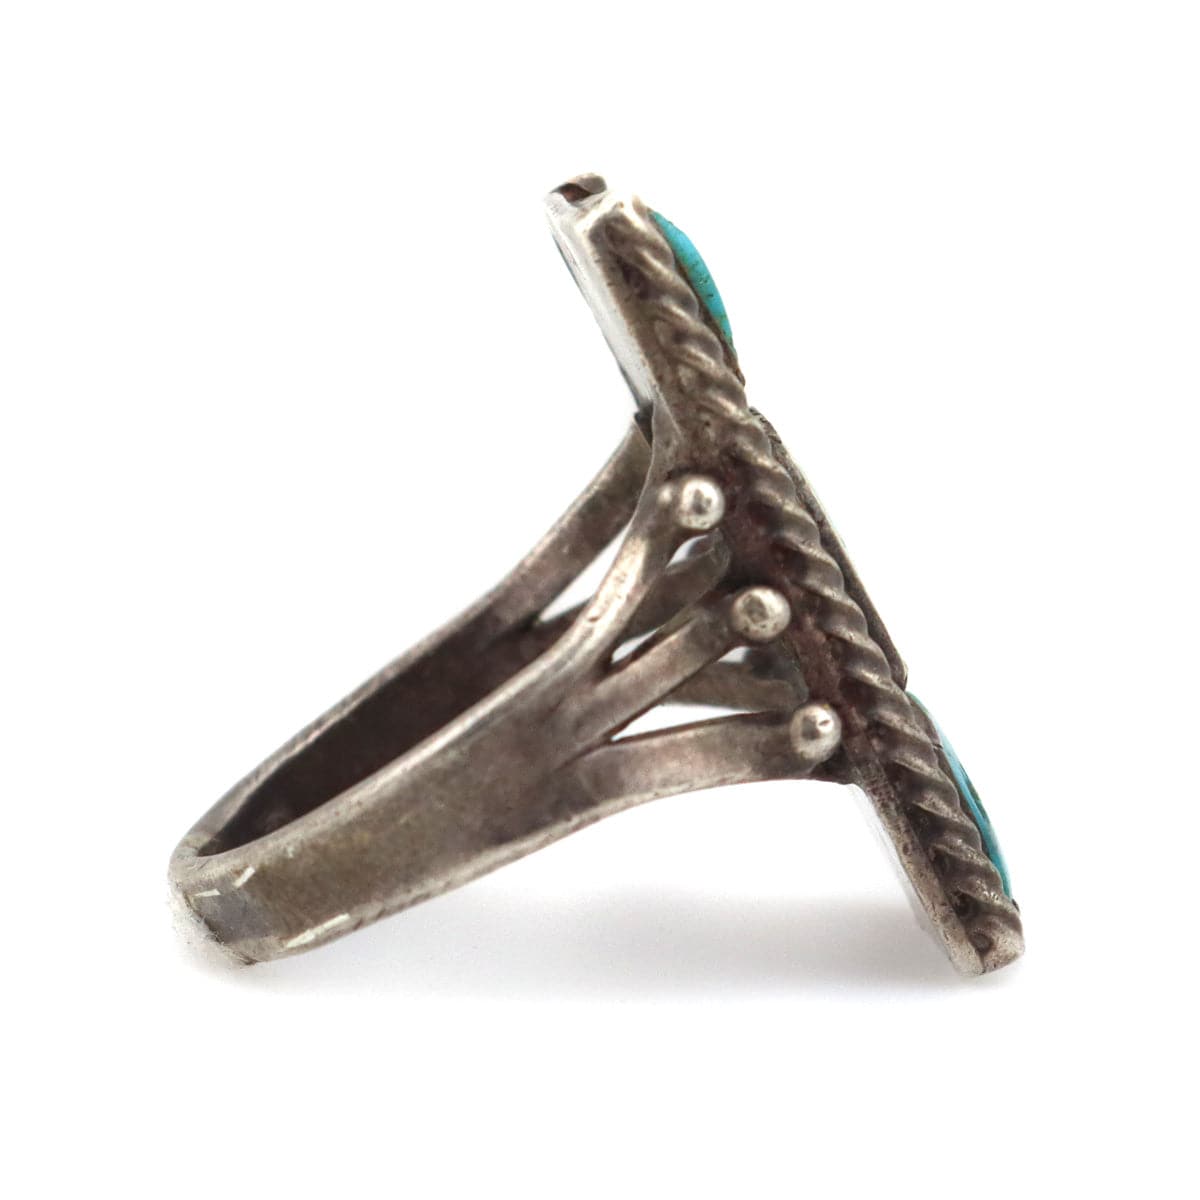 Navajo Turquoise and Silver Ring c. 1930s, size 10.25 (J91427-0222-012) 1